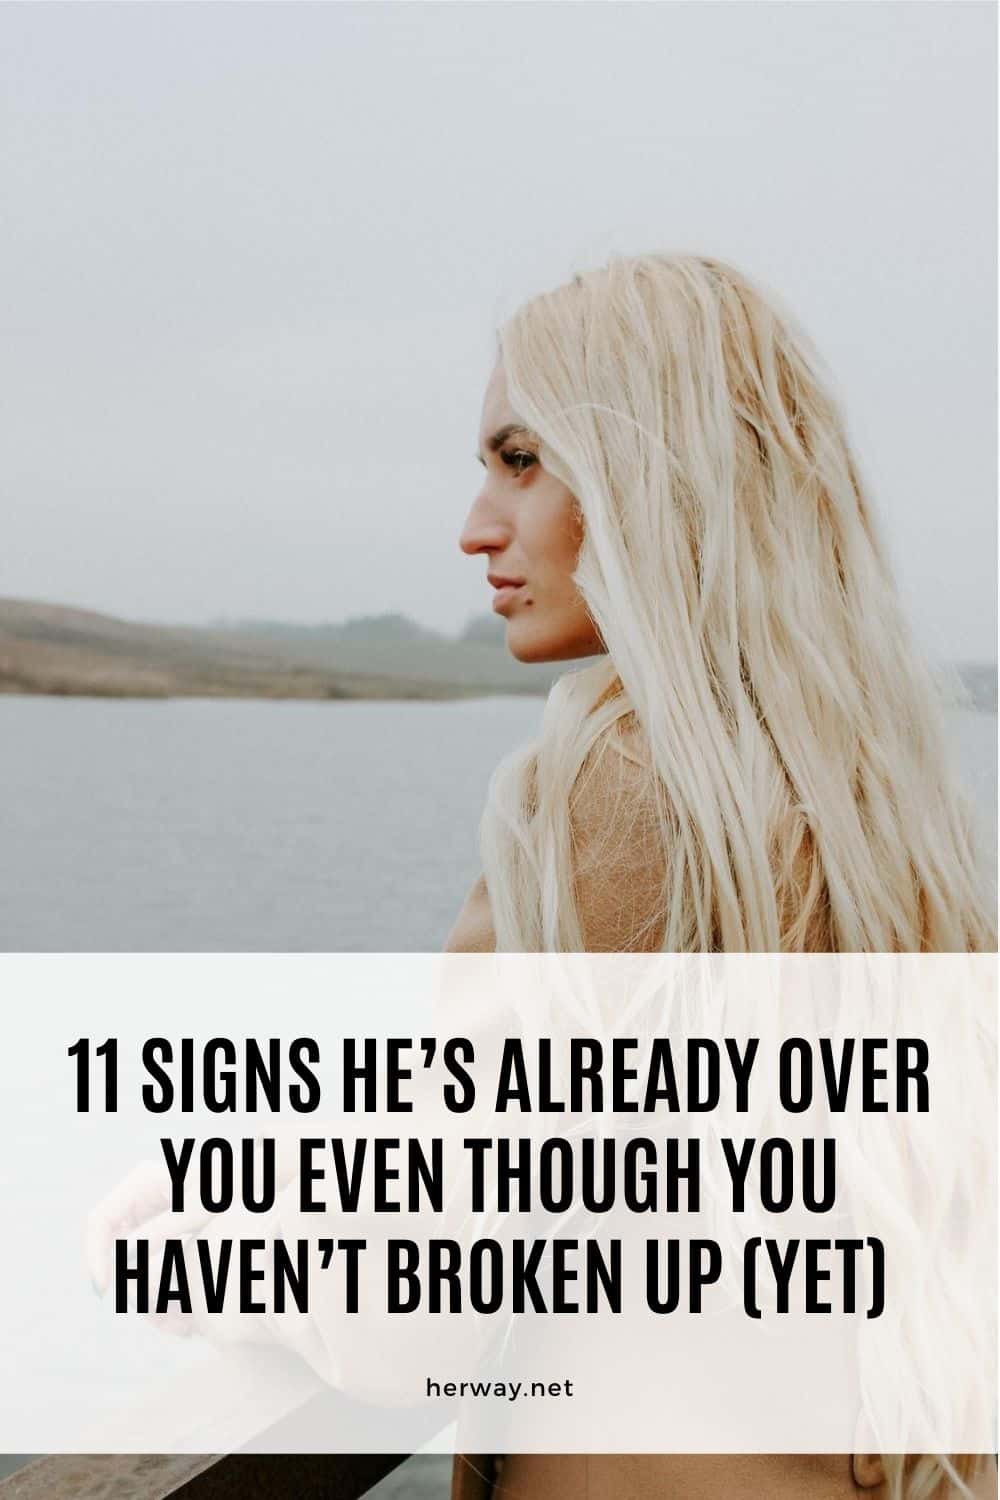 11 Signs He’s Already Over You Even Though You Haven’t Broken Up (Yet)